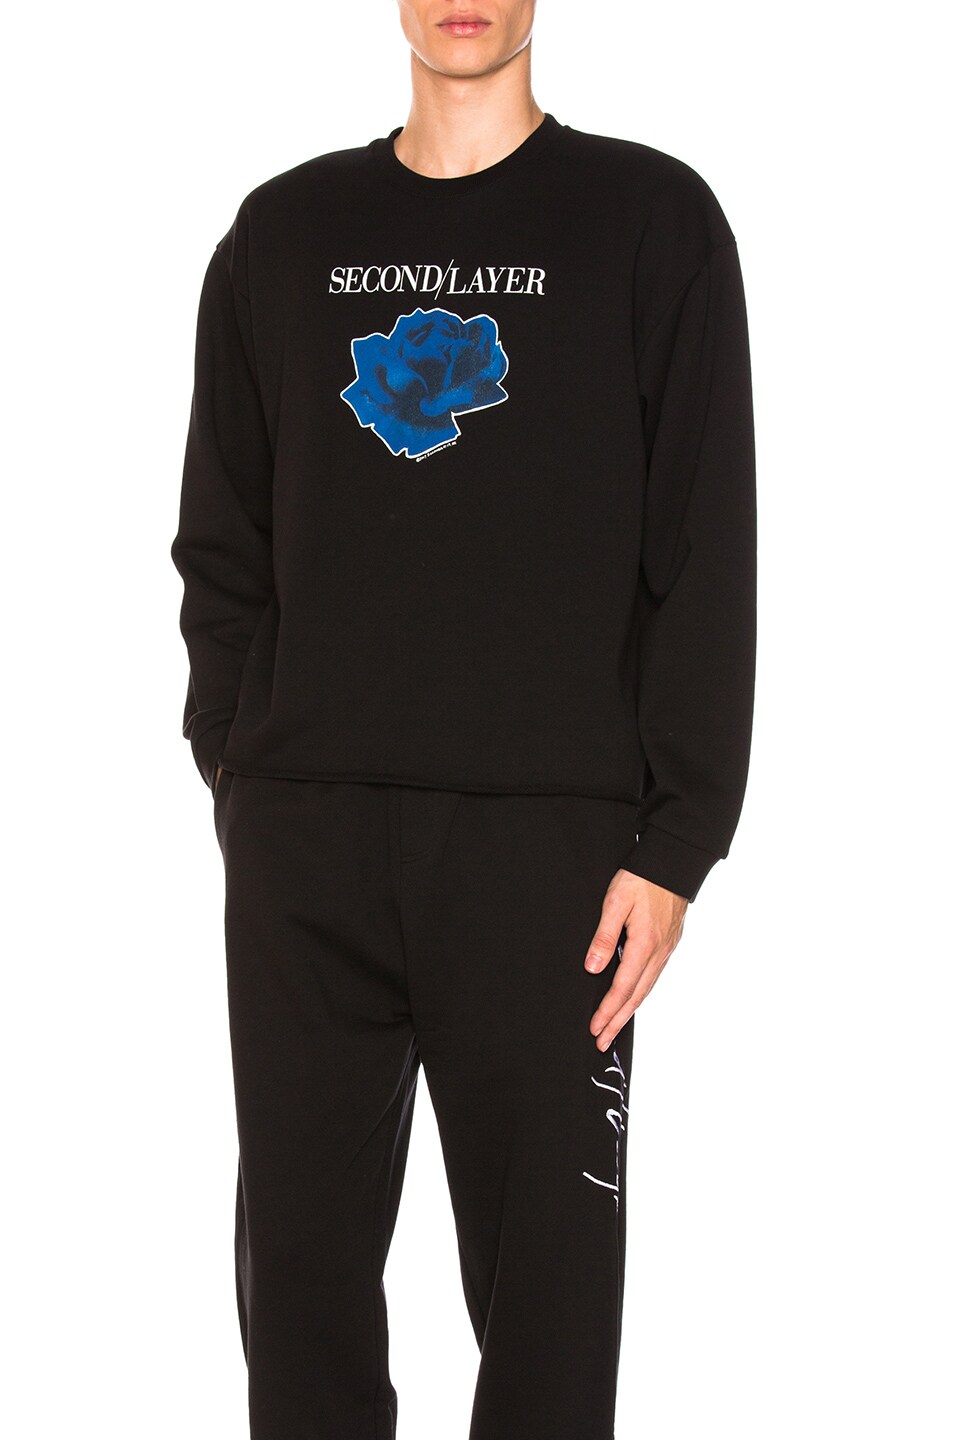 Image 1 of Second/Layer Disconnect Tour Sweatshirt in Black